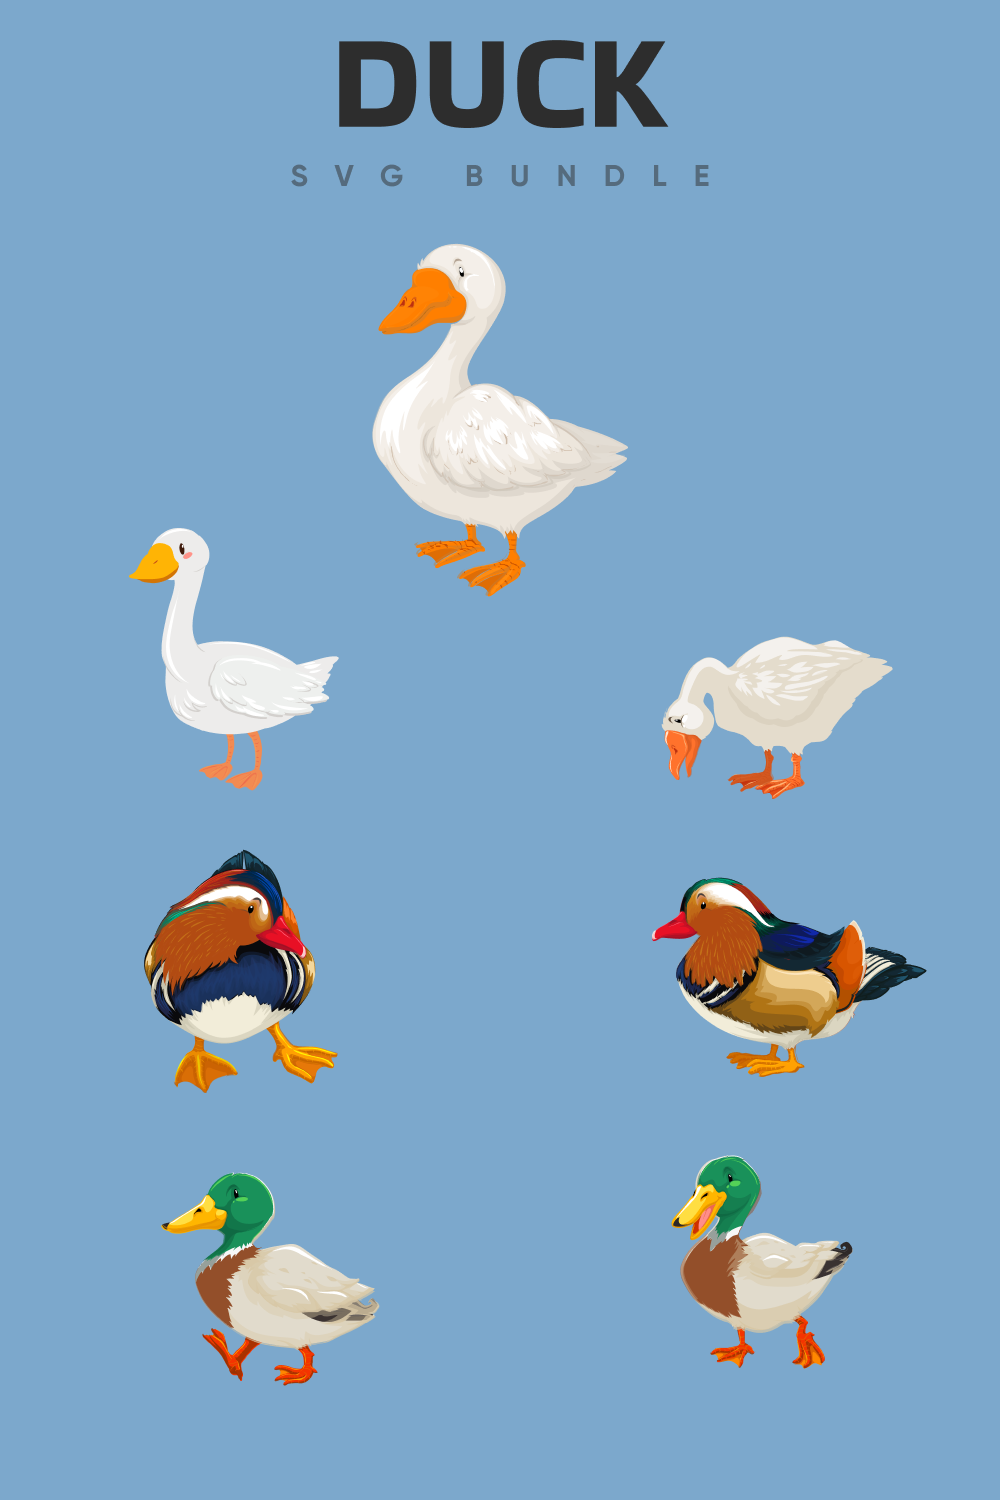 Diverse of the ducks.